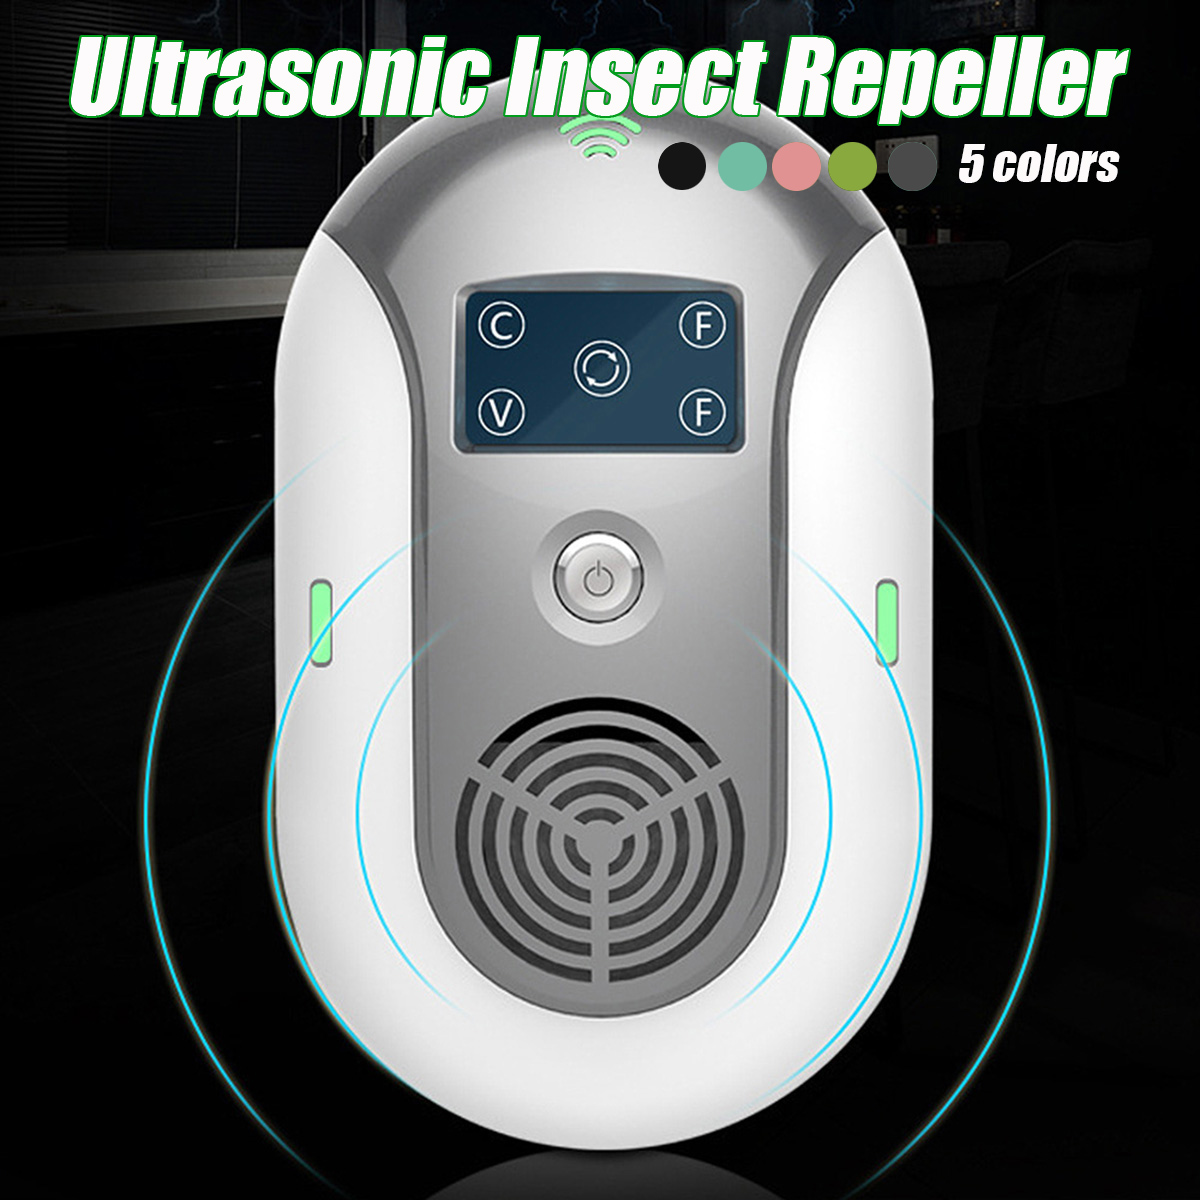 Ultrasonic-Electronic-Pest-Insect-Repeller-Anti-Mouse-Mosquito-Cockroach-Bug-Killer-Pests-Control-1556742-1